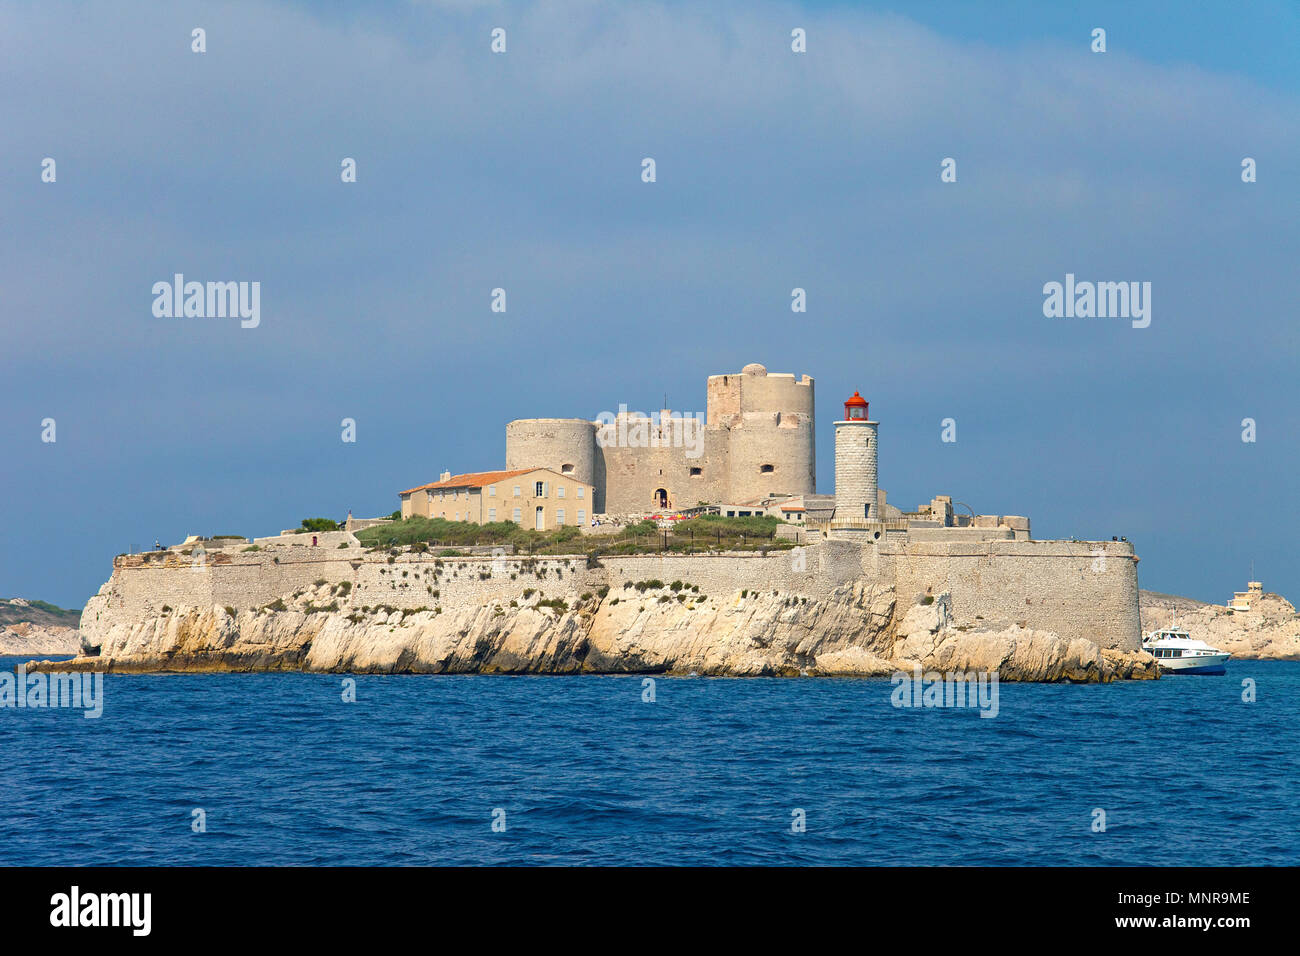 Chateau d'If on Île d’If, former prison island close to Marseille, Bouches-du-Rhone, Provence-Alpes-Côte d’Azur, South France, France, Europe Stock Photo